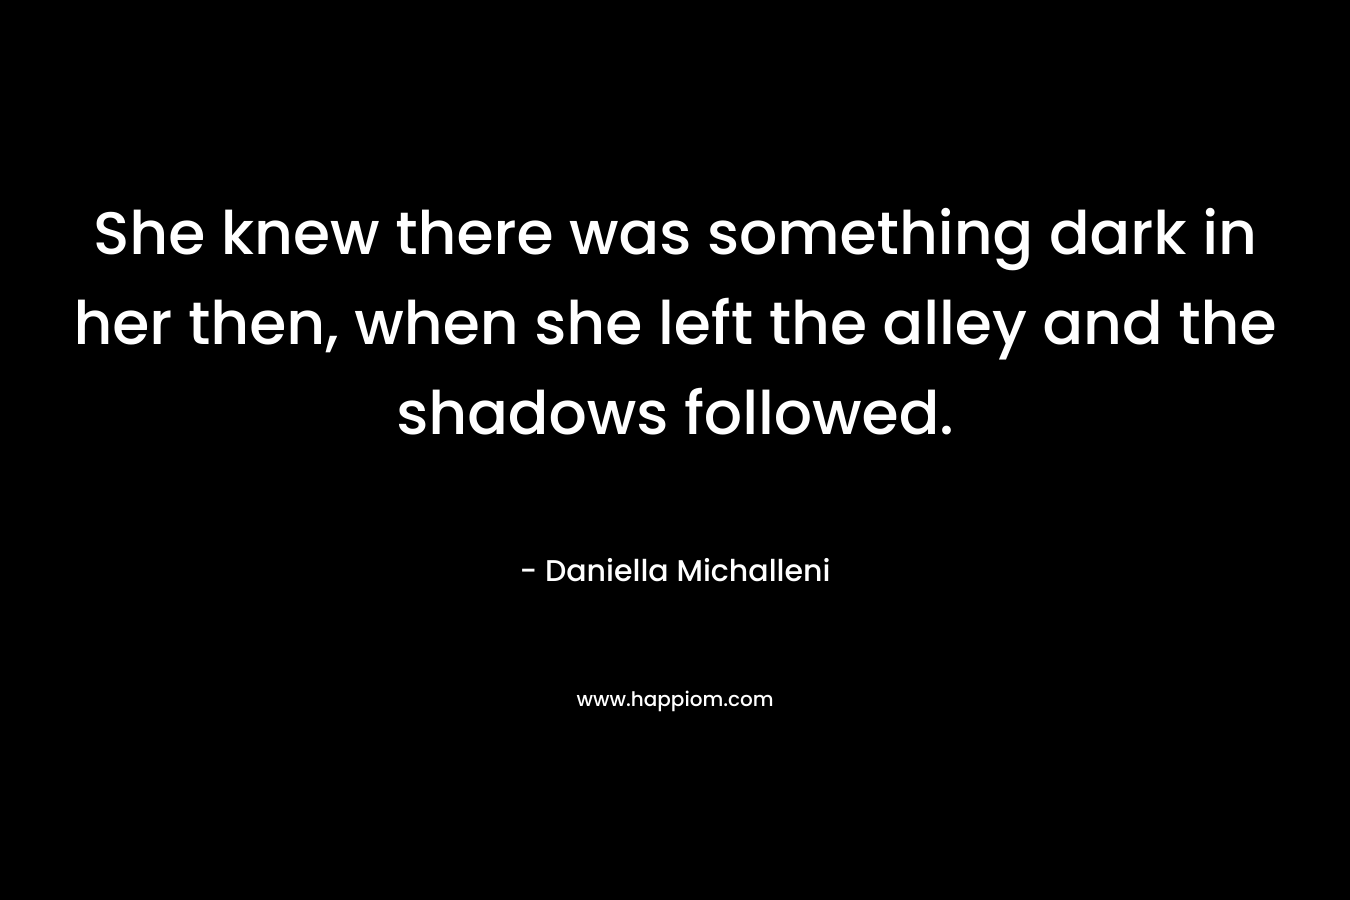 She knew there was something dark in her then, when she left the alley and the shadows followed. – Daniella Michalleni